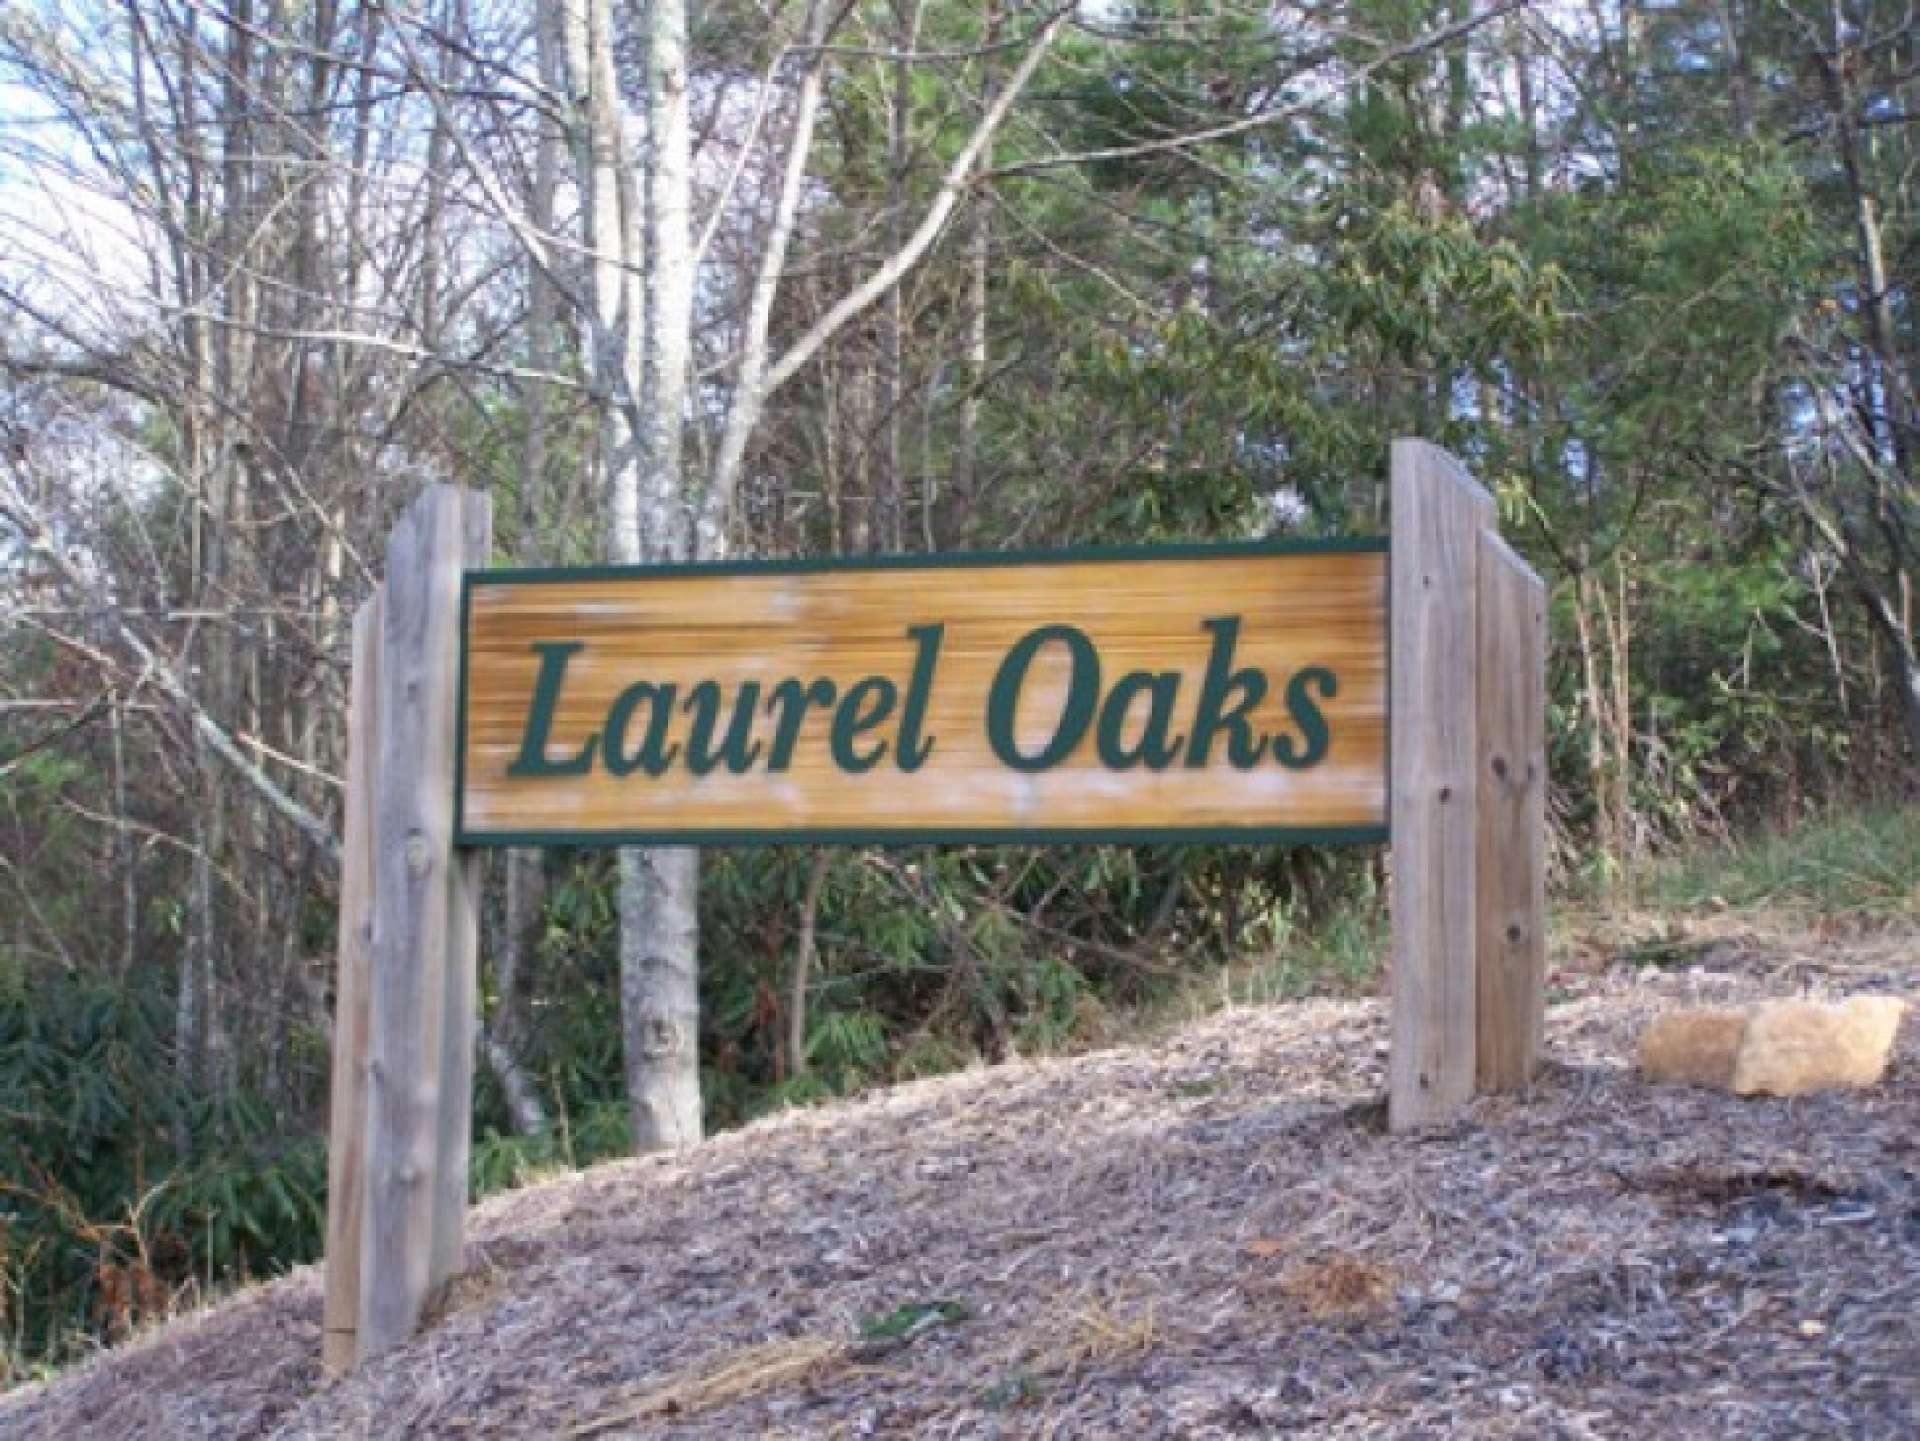 Laurel Oaks is located in the Fleetwood area of Ashe County and convenient to Boone and West Jefferson. These lovely home sites are a great deal for the investor!